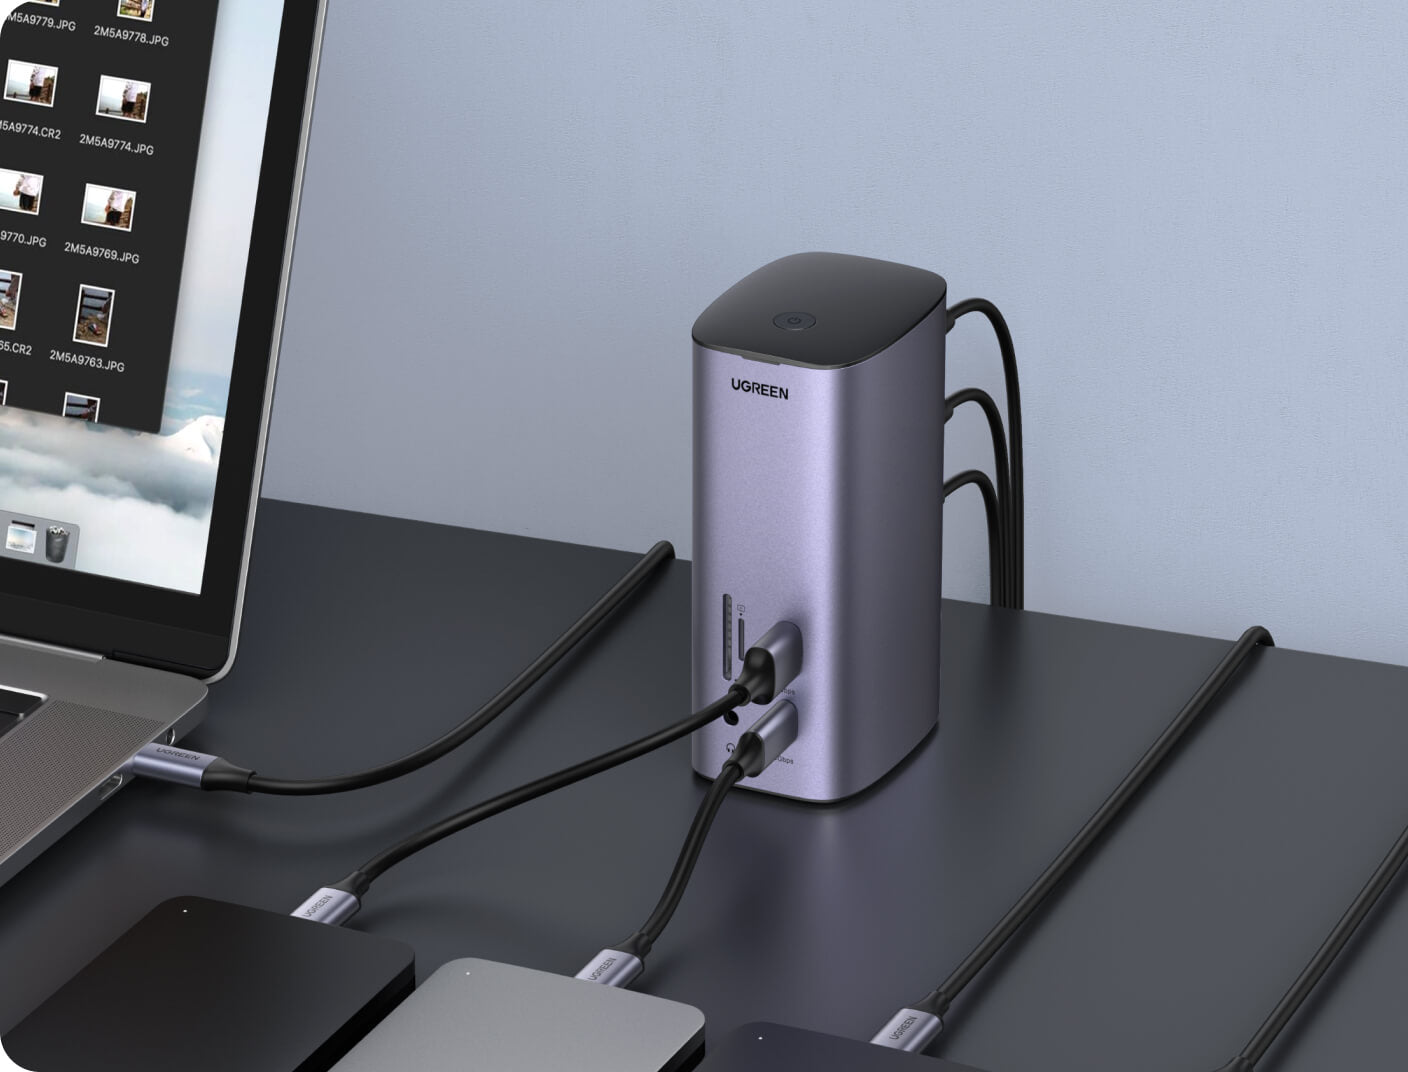 This regularly $50 Baseus 65W USB-C charging station with two AC